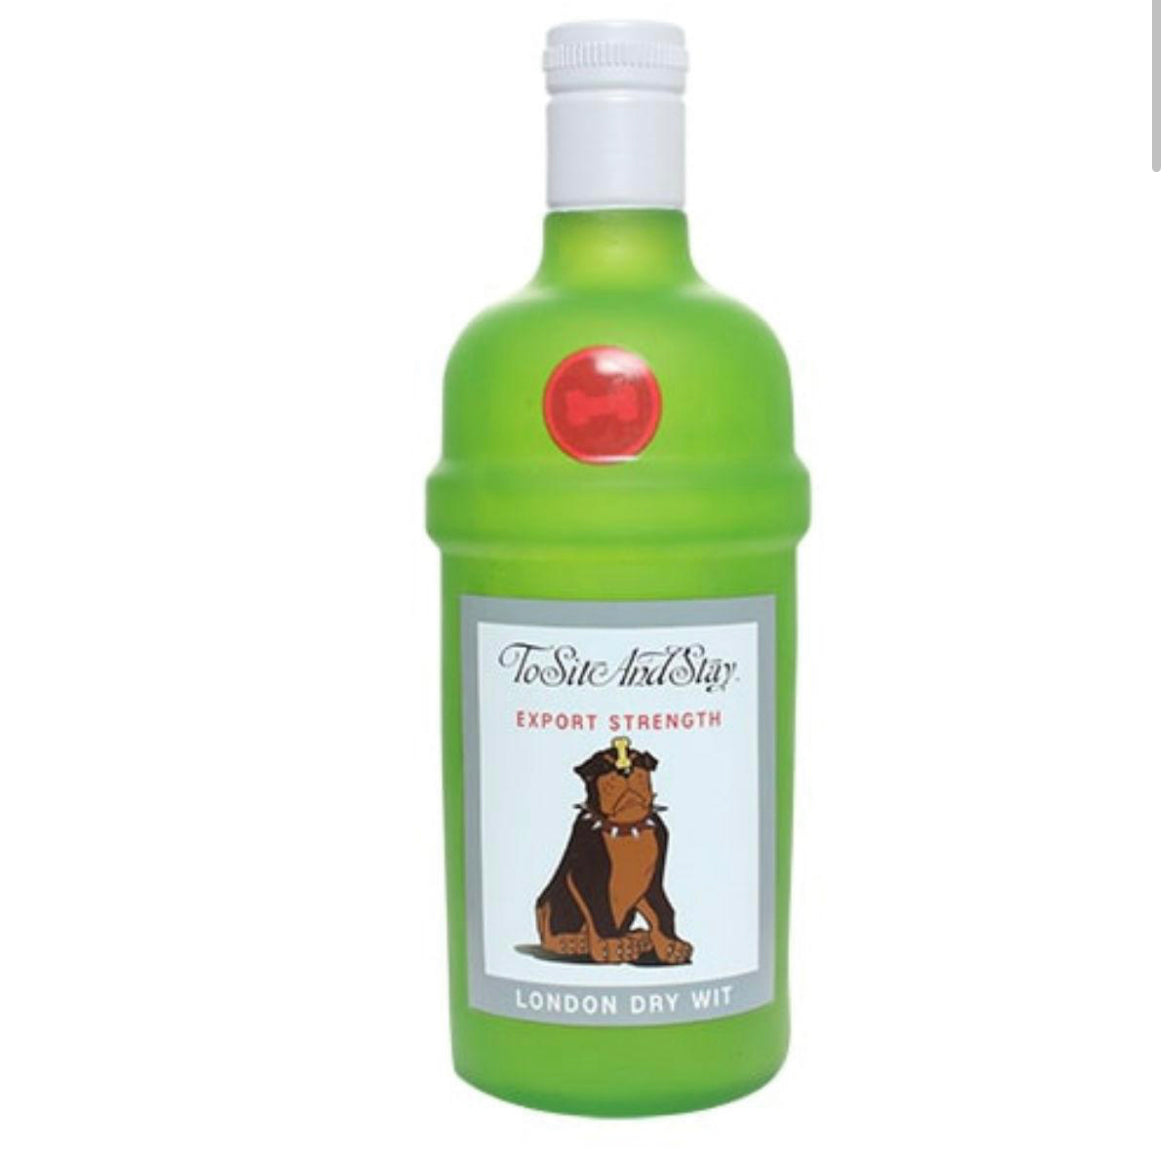 Liquor Bottle Dog Toy - To Sit and Stay